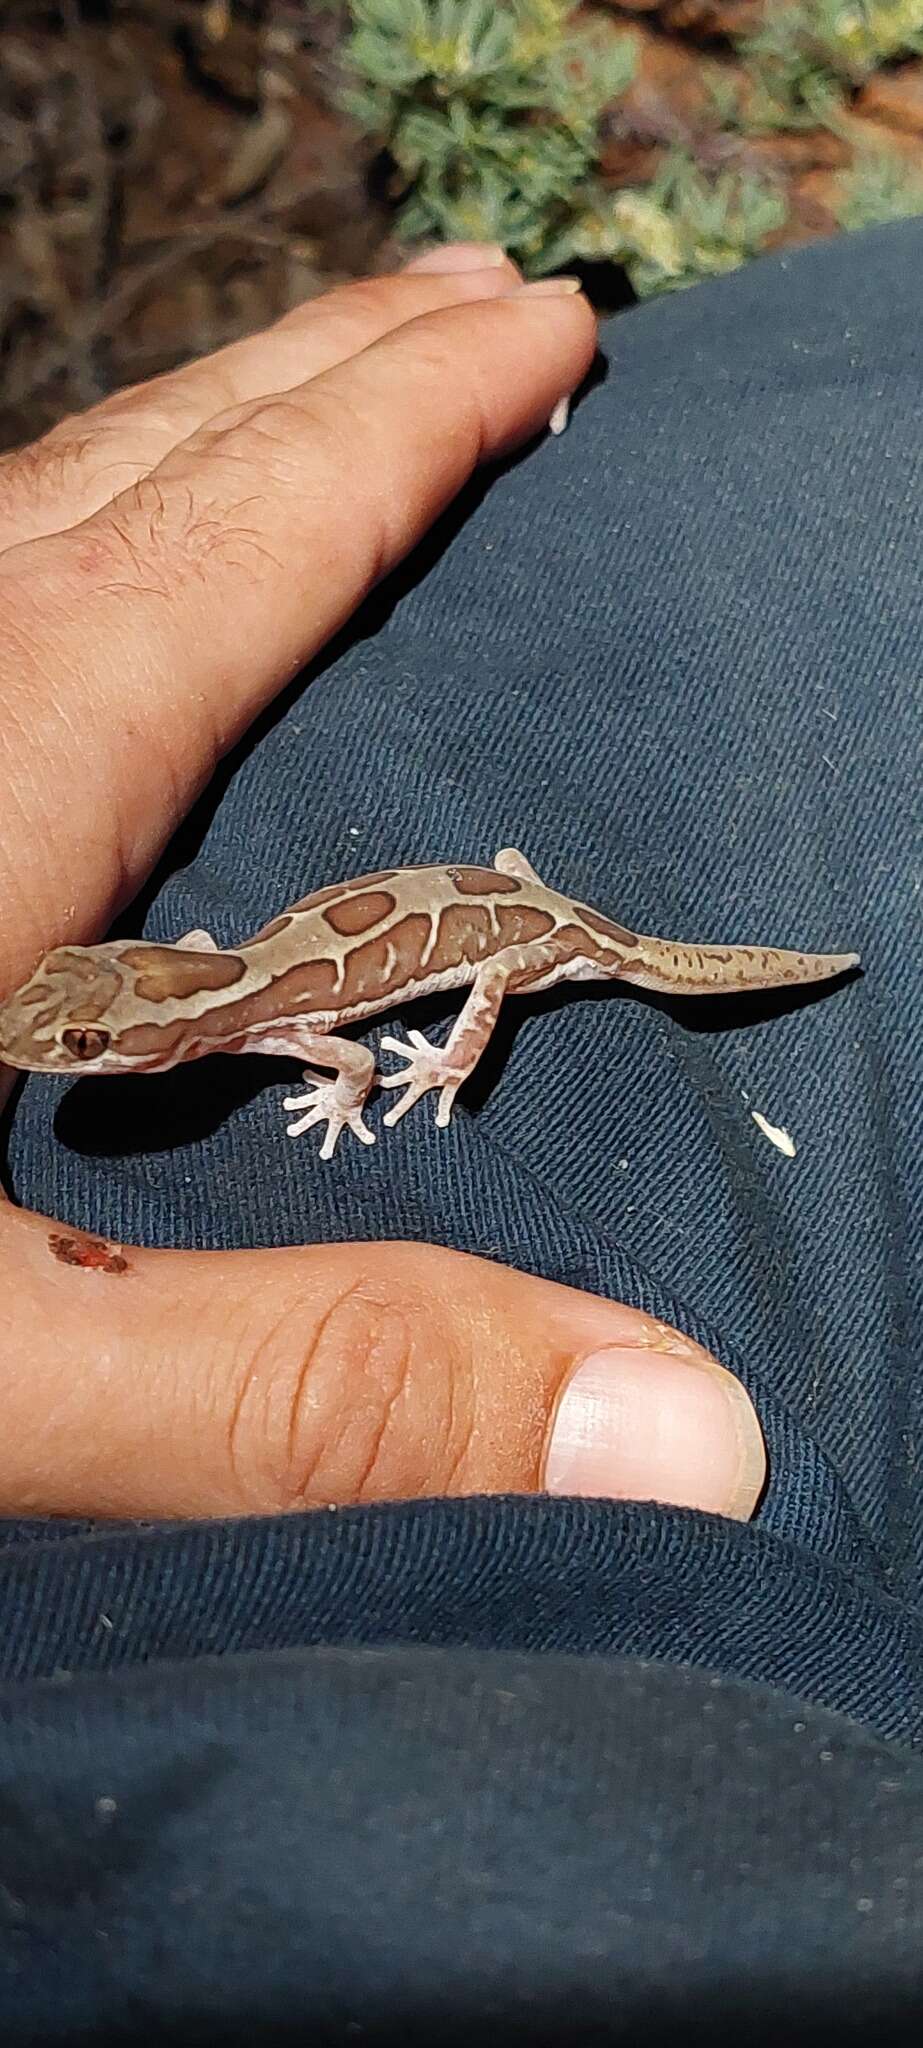 Image of Box-patterned Gecko